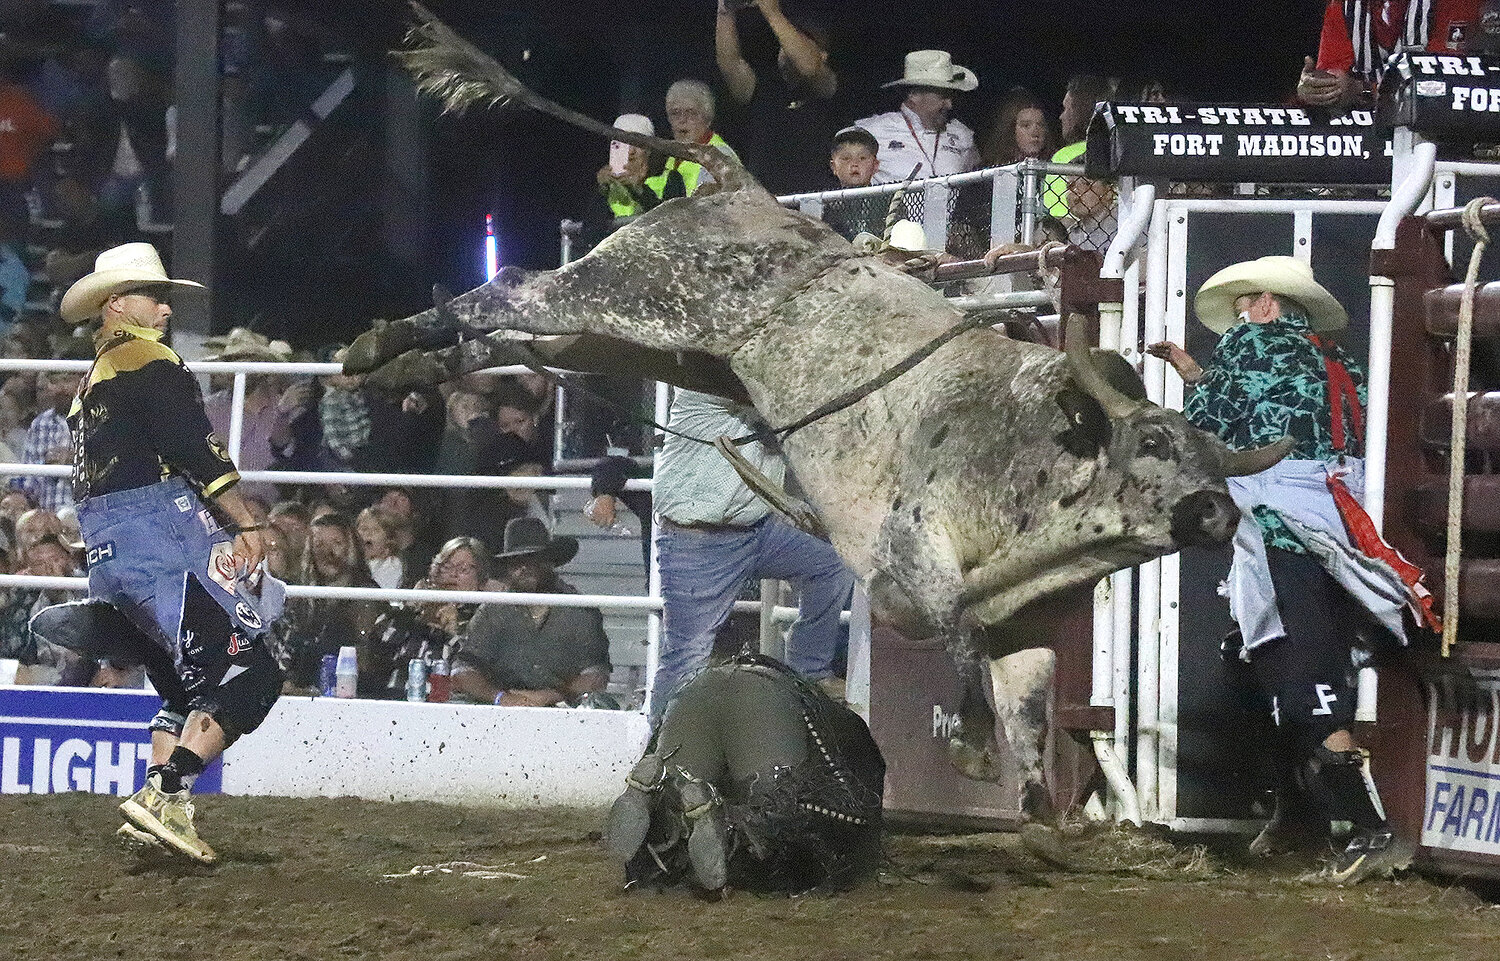 Bullrider Ethan Skogquist gets caught under his bull as bullfighters Dusty Tuckness, left, and Nathan Harp, right, get the animal's attention. Skogquist escaped without injury.